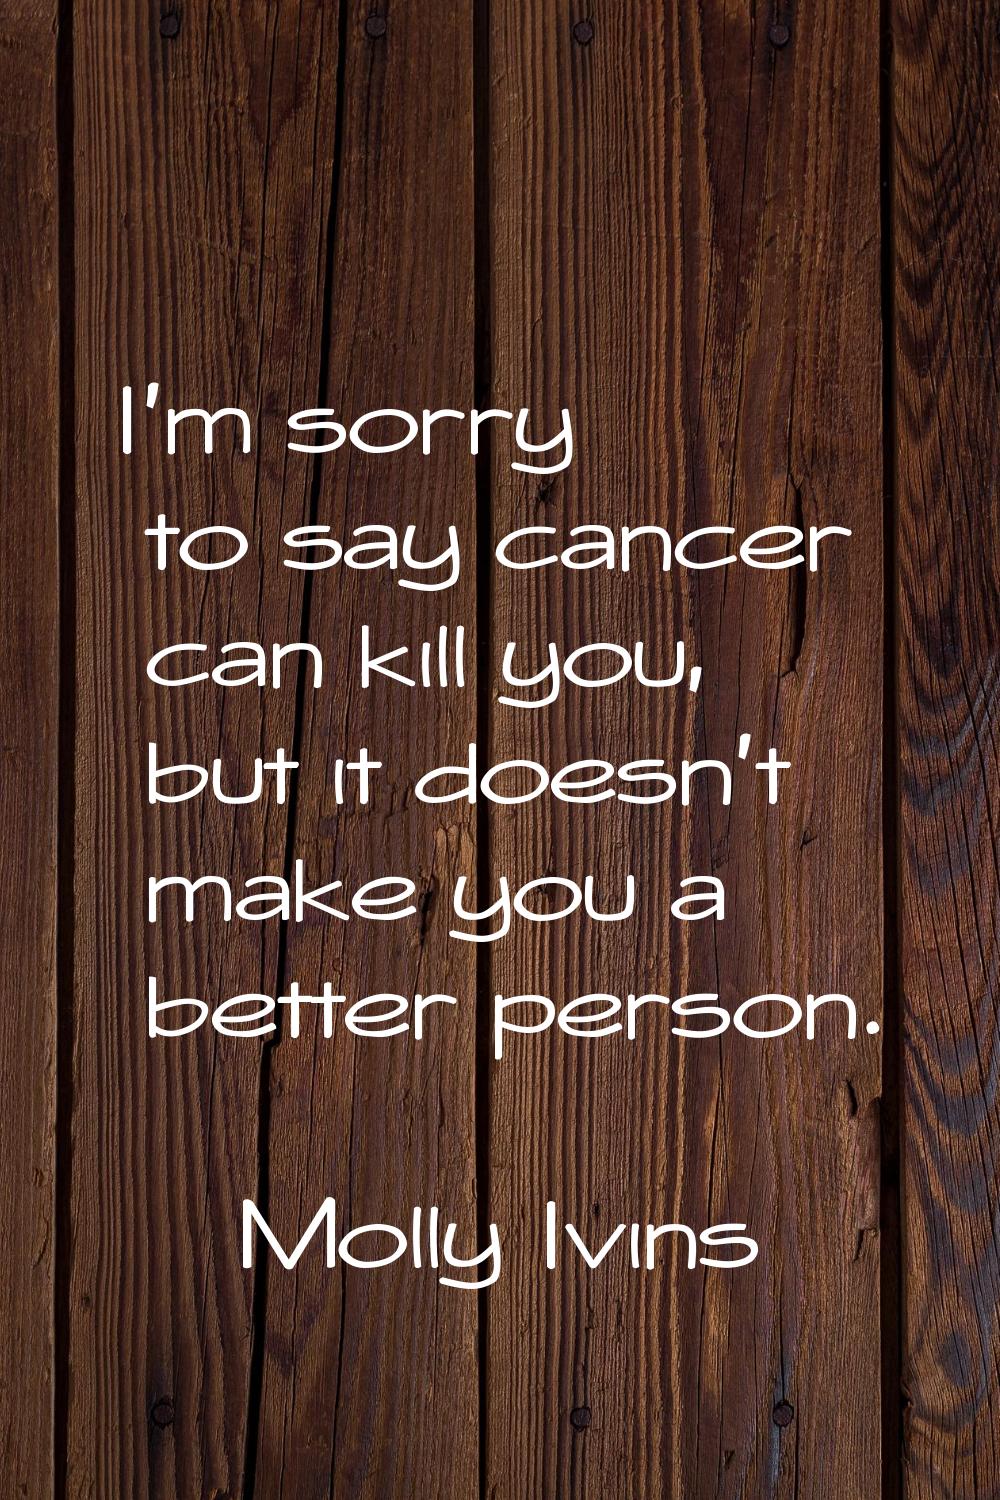 I'm sorry to say cancer can kill you, but it doesn't make you a better person.